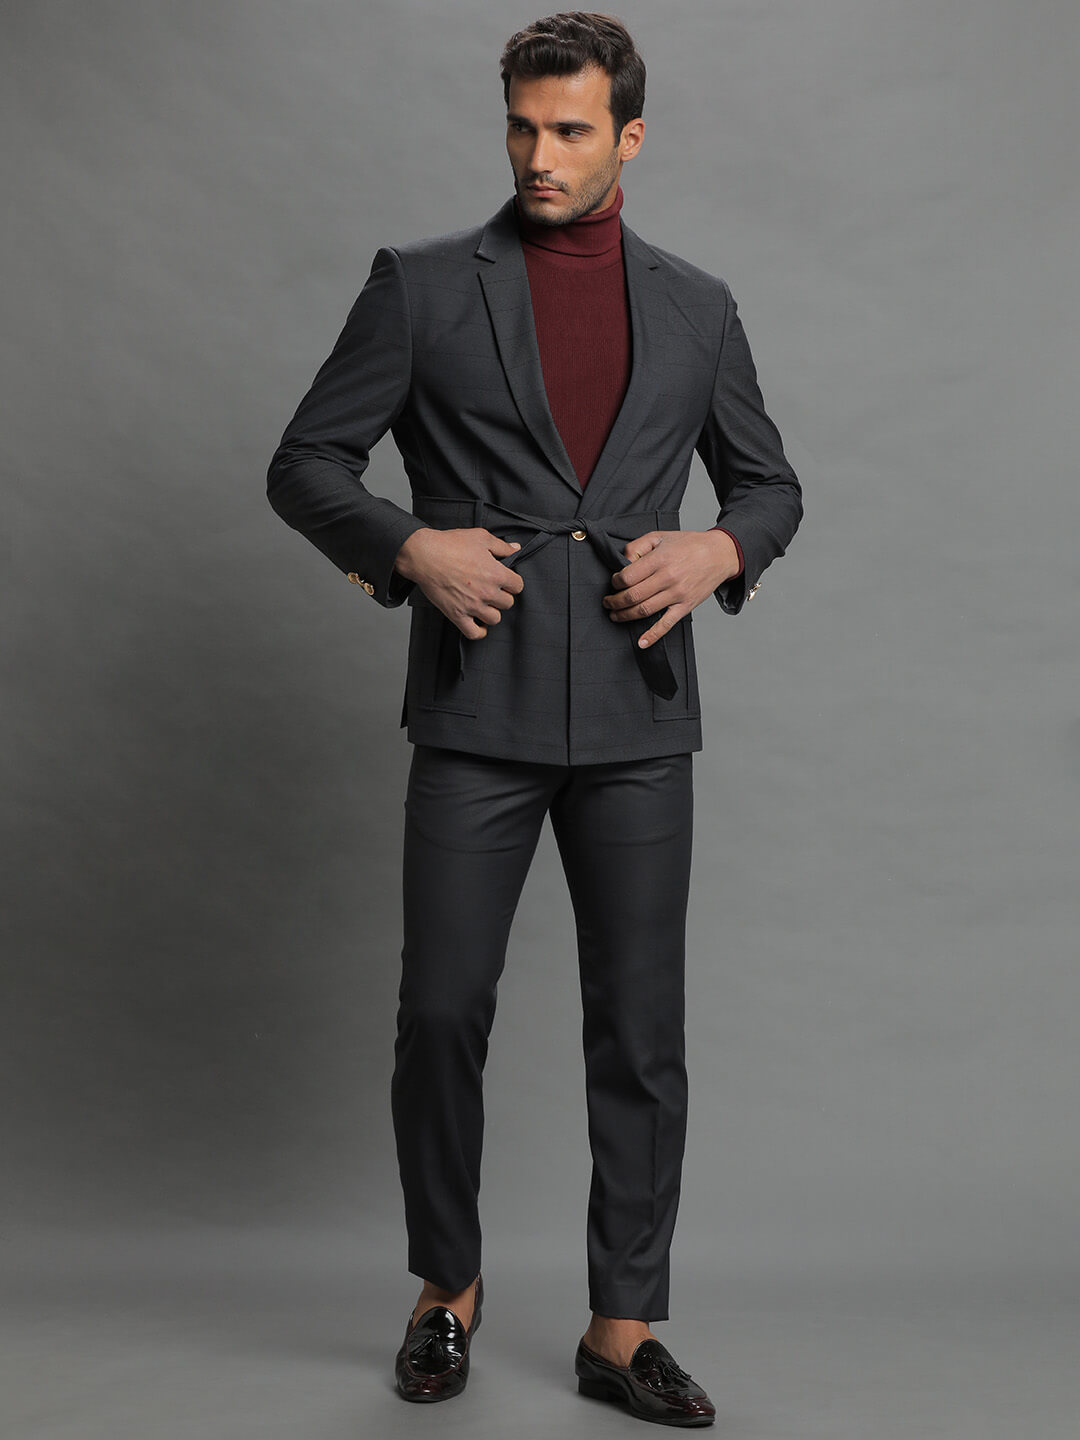 grey-knot-style-pocket-suit